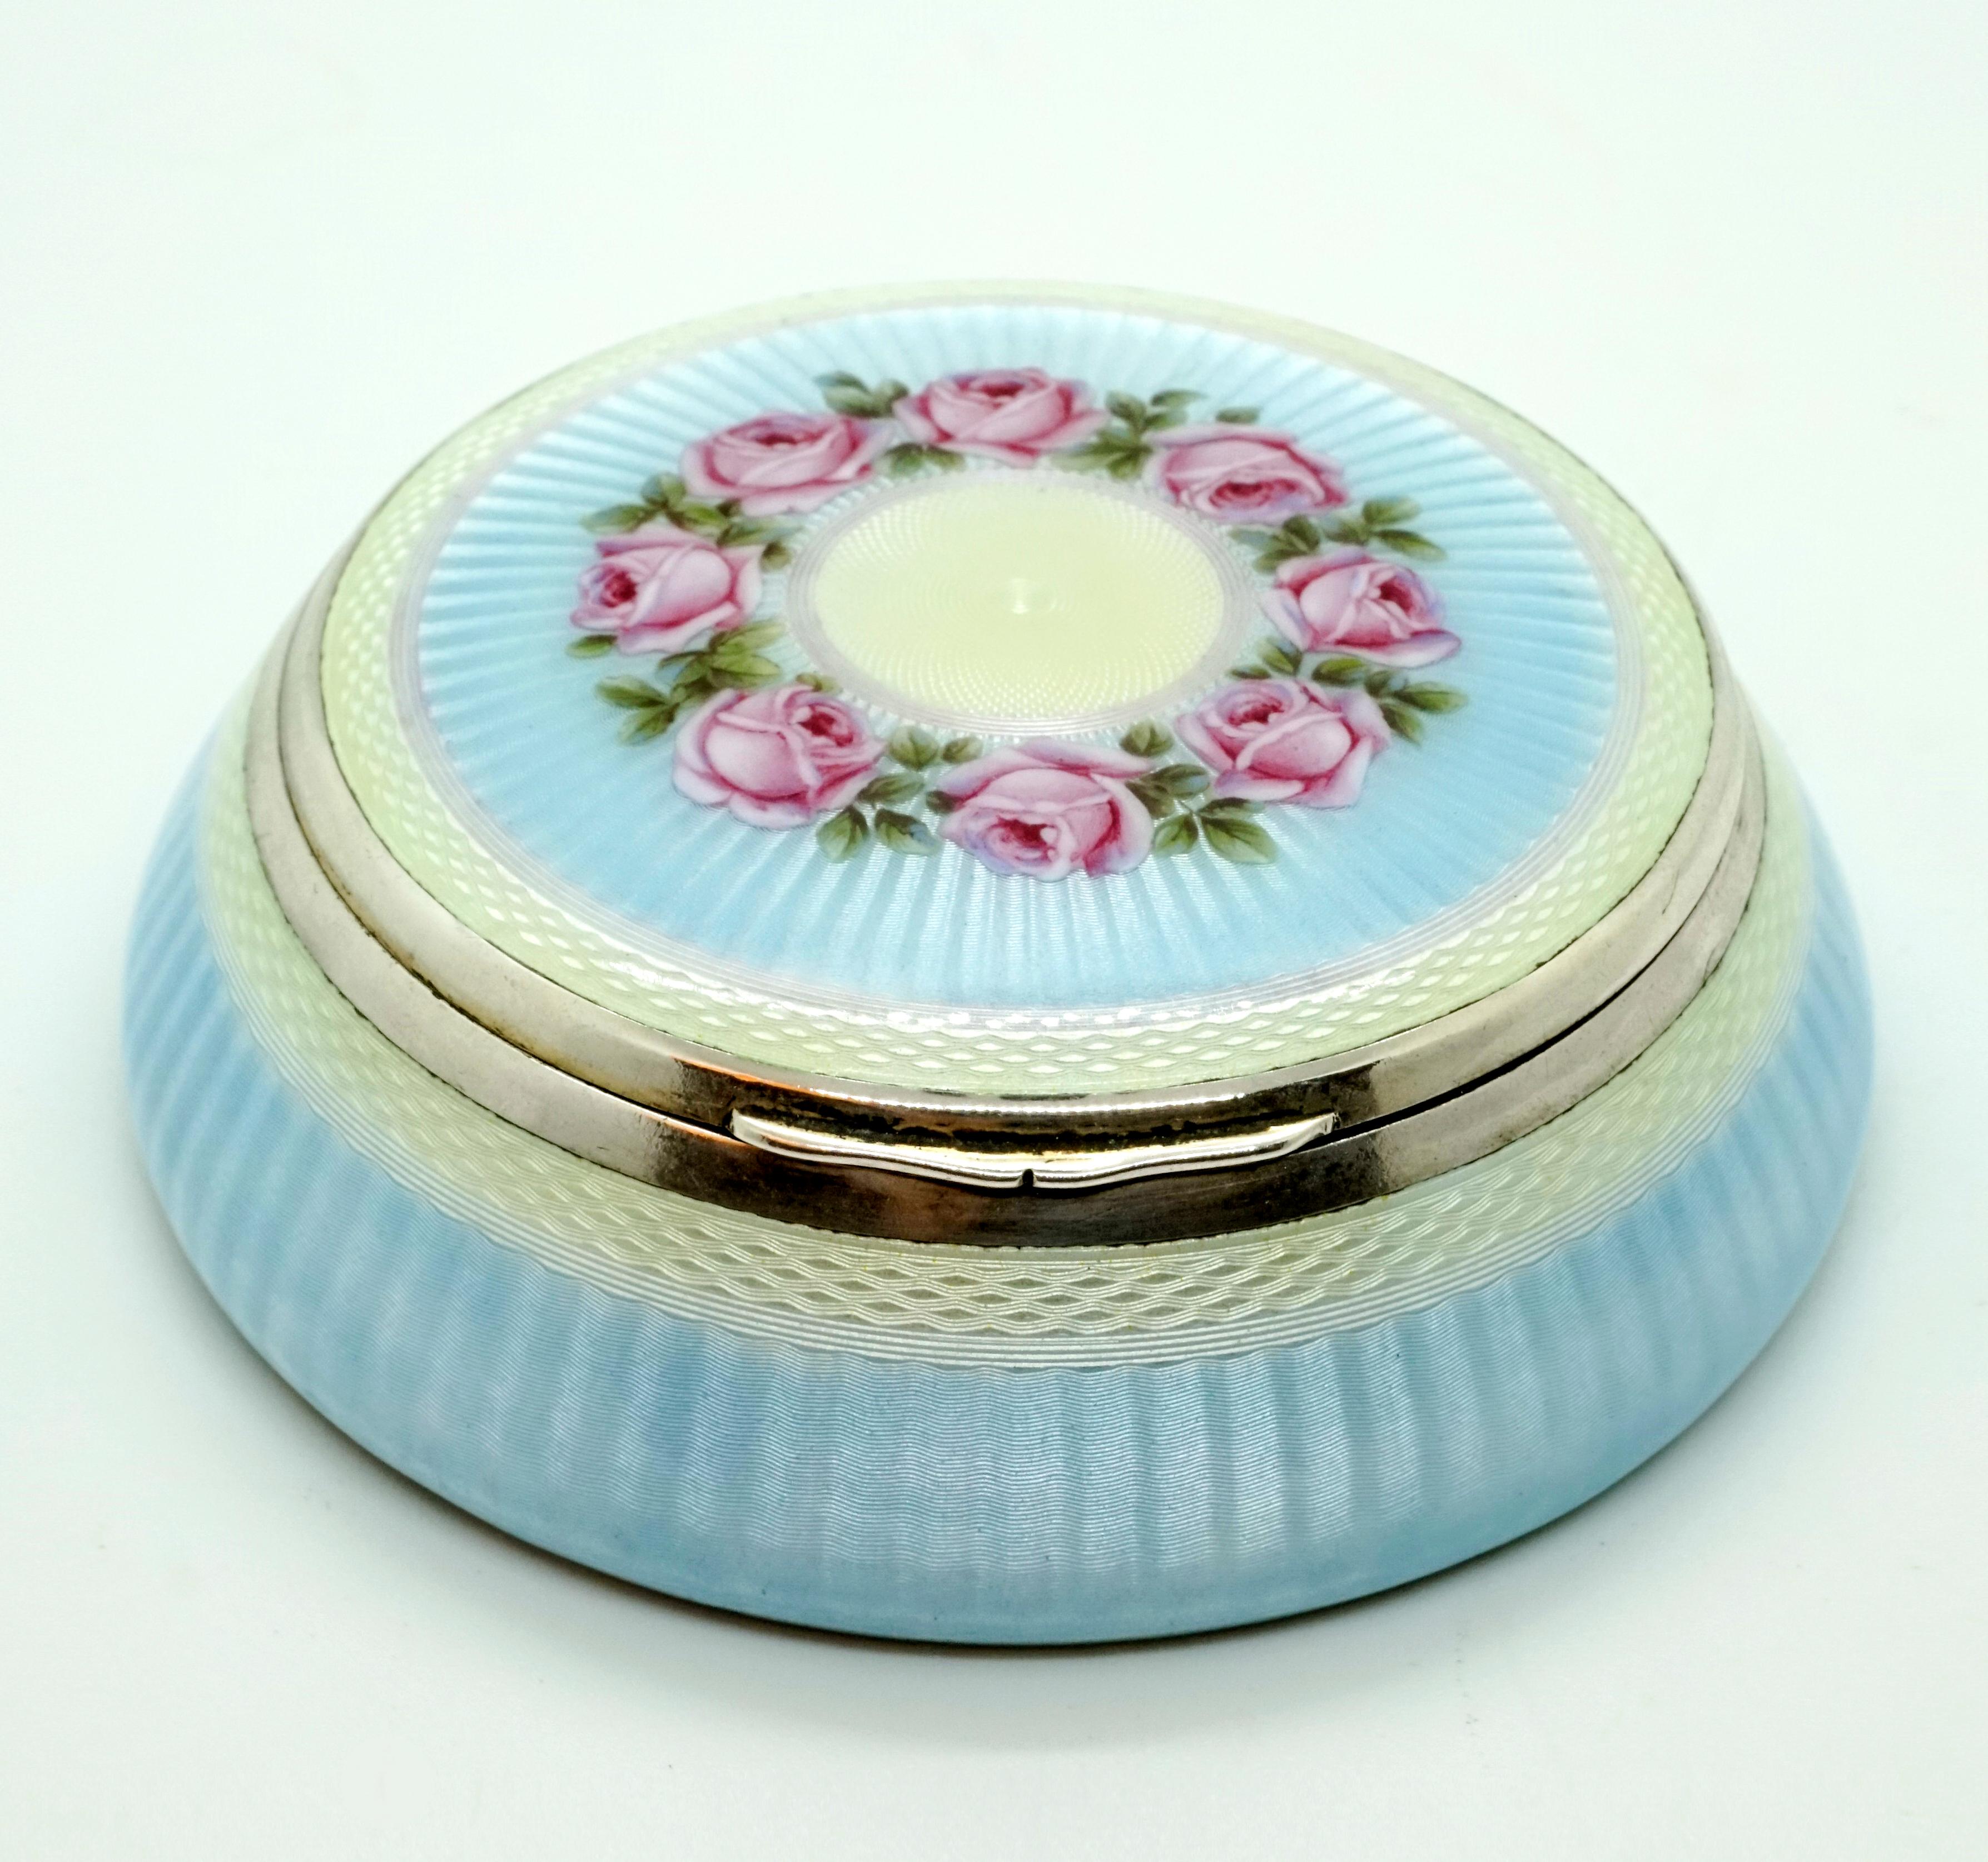 Exquisite enamel box from the period, circa 1900

Round silver box, completely gouilloché and enameled in light blue and cream white. Finest magnifying glass enamel painting, wreath with rose petals on the lid. Internal